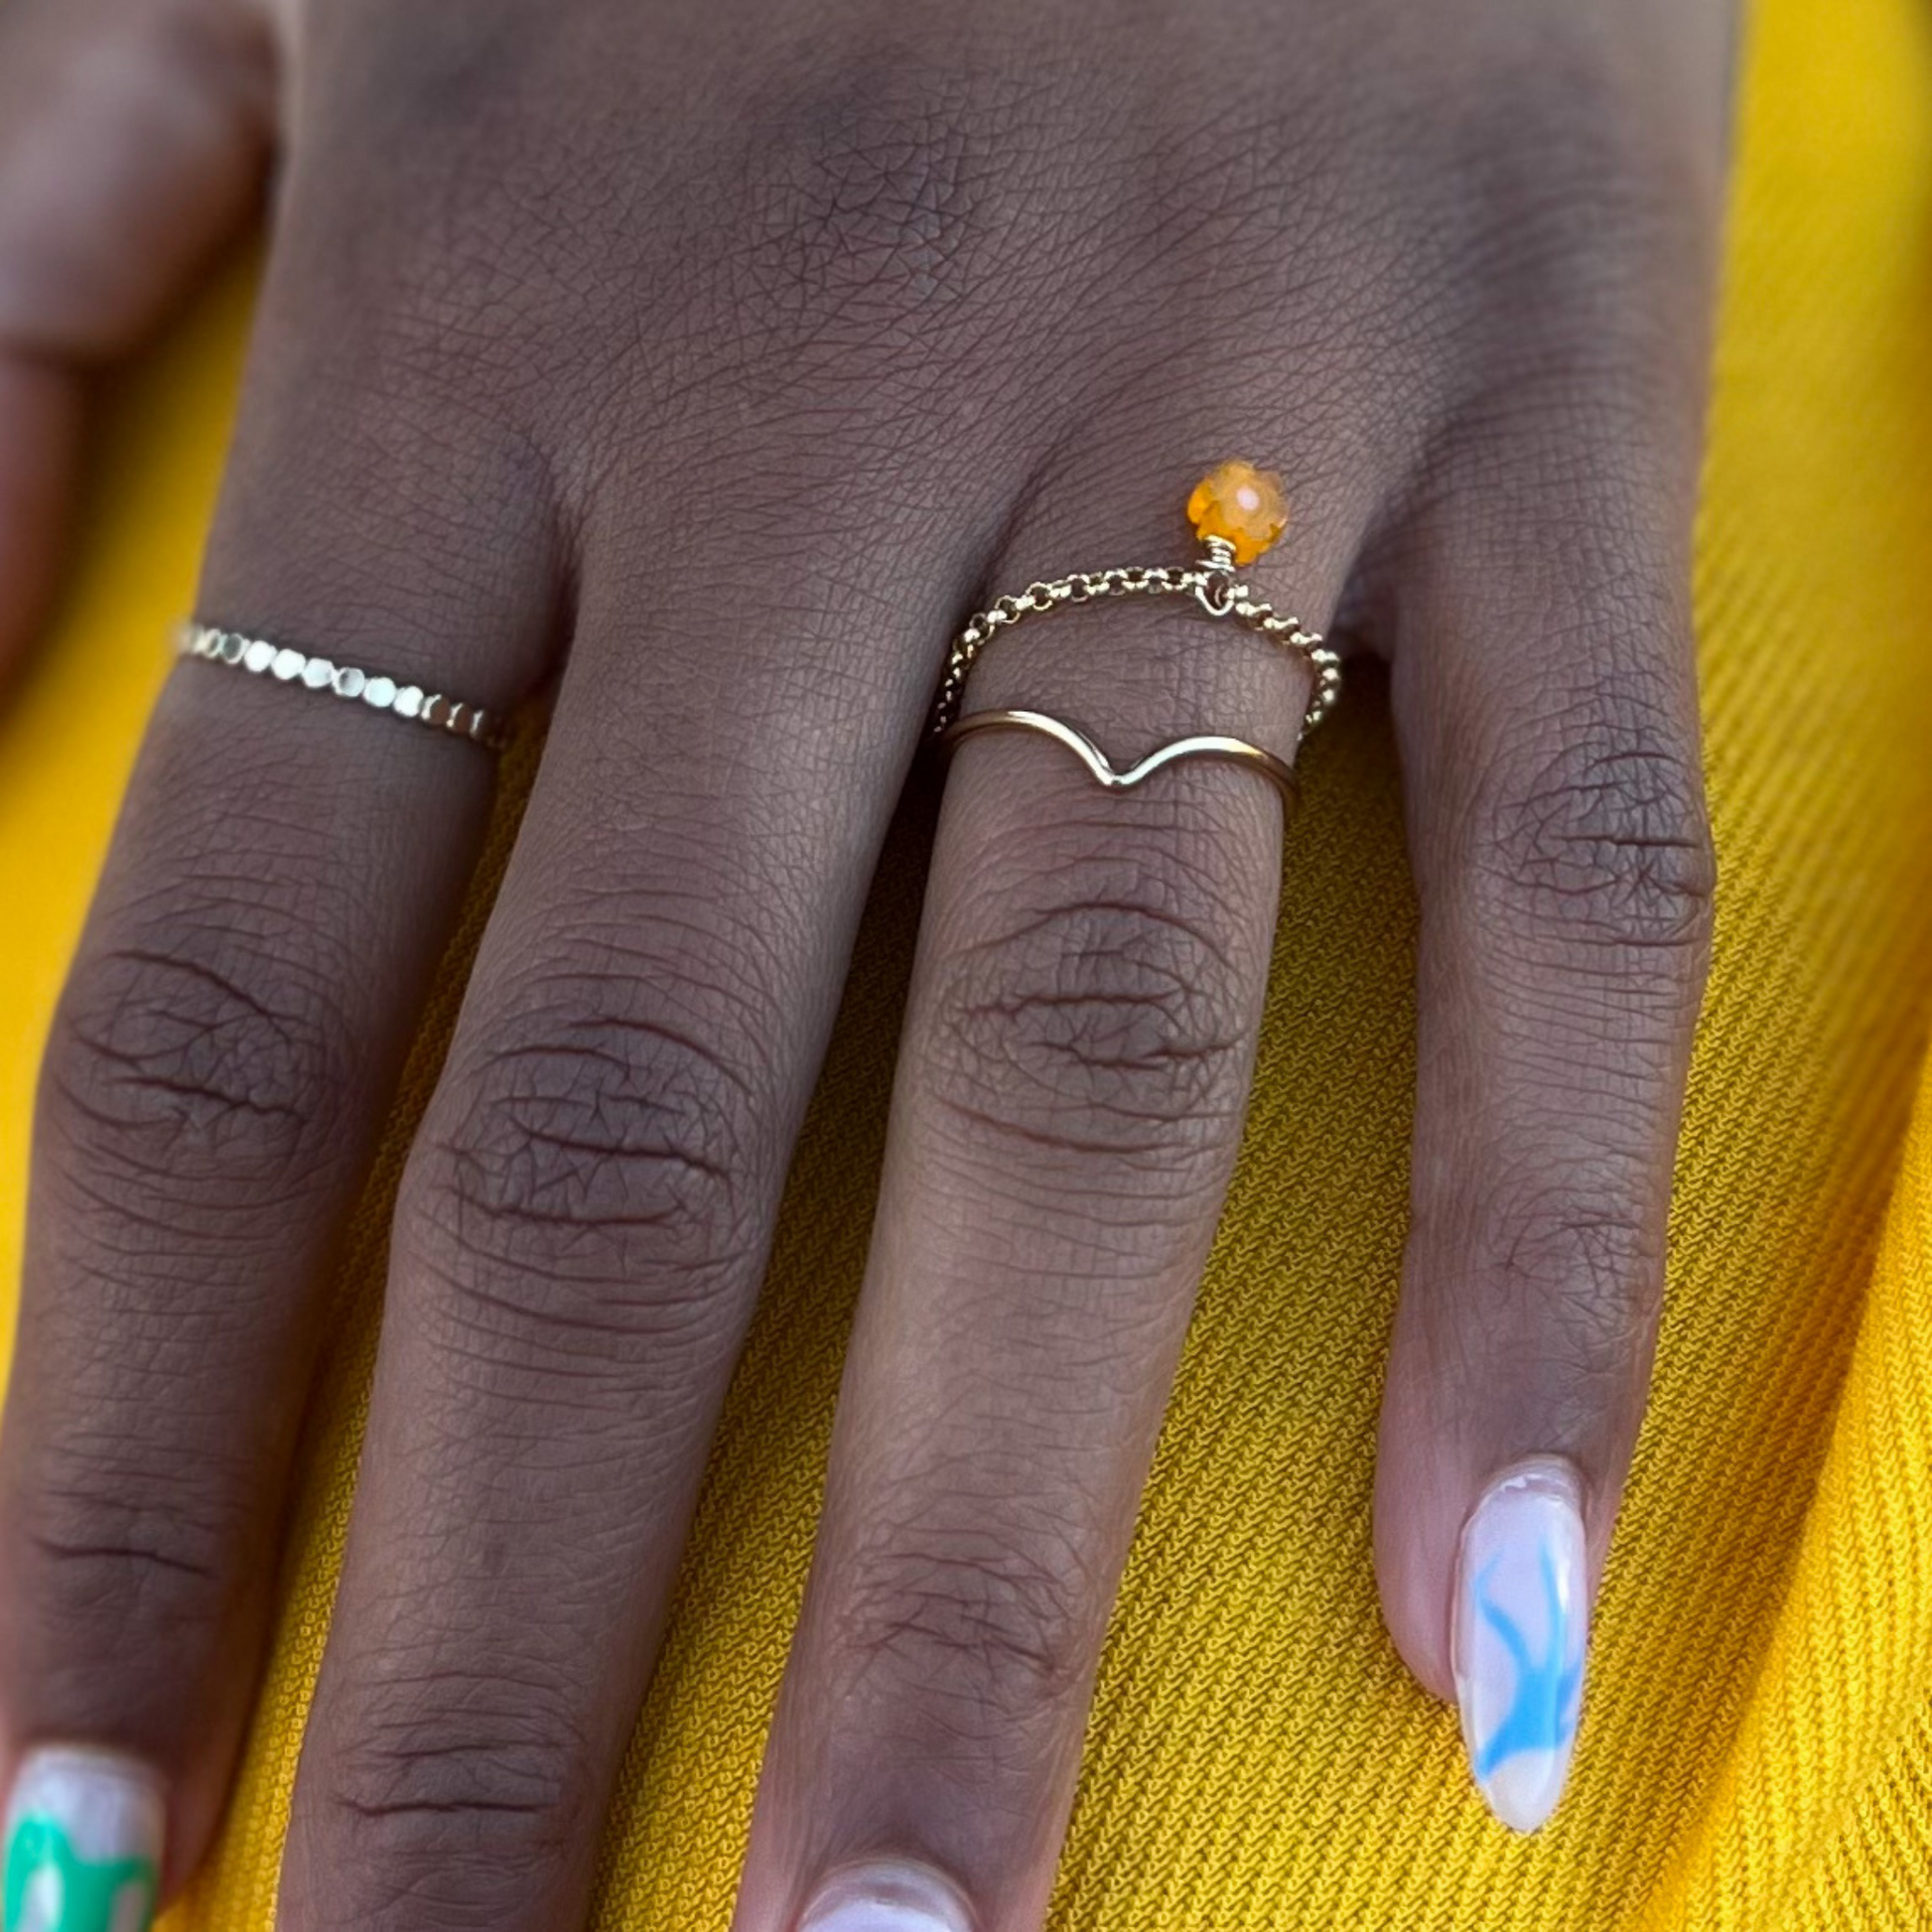 Roop Jewelry flower pendant ring. Gold filled rings in Oakland, Ca. Spring 2022 jewelry trends. Summer 2022 jewelry trends. Spring 2022 fashion trends. Summer 2022 fashion trends.